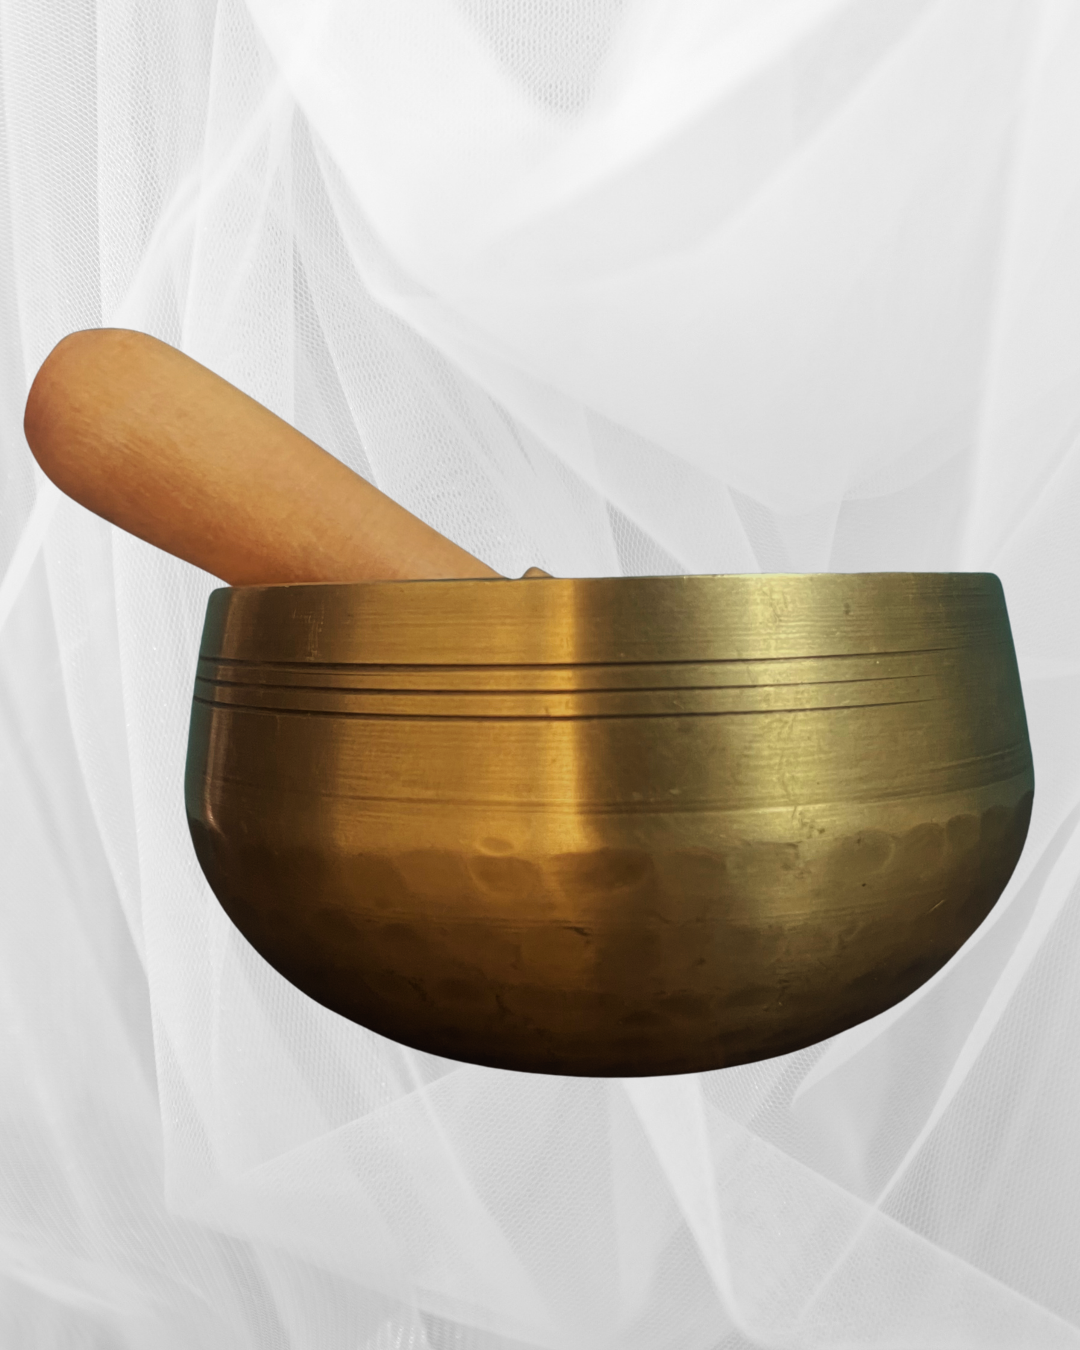 Singing Bowl - 5-metal Panchaloha Hand-hammered Bowl (4 inch) with Wooden Mallet